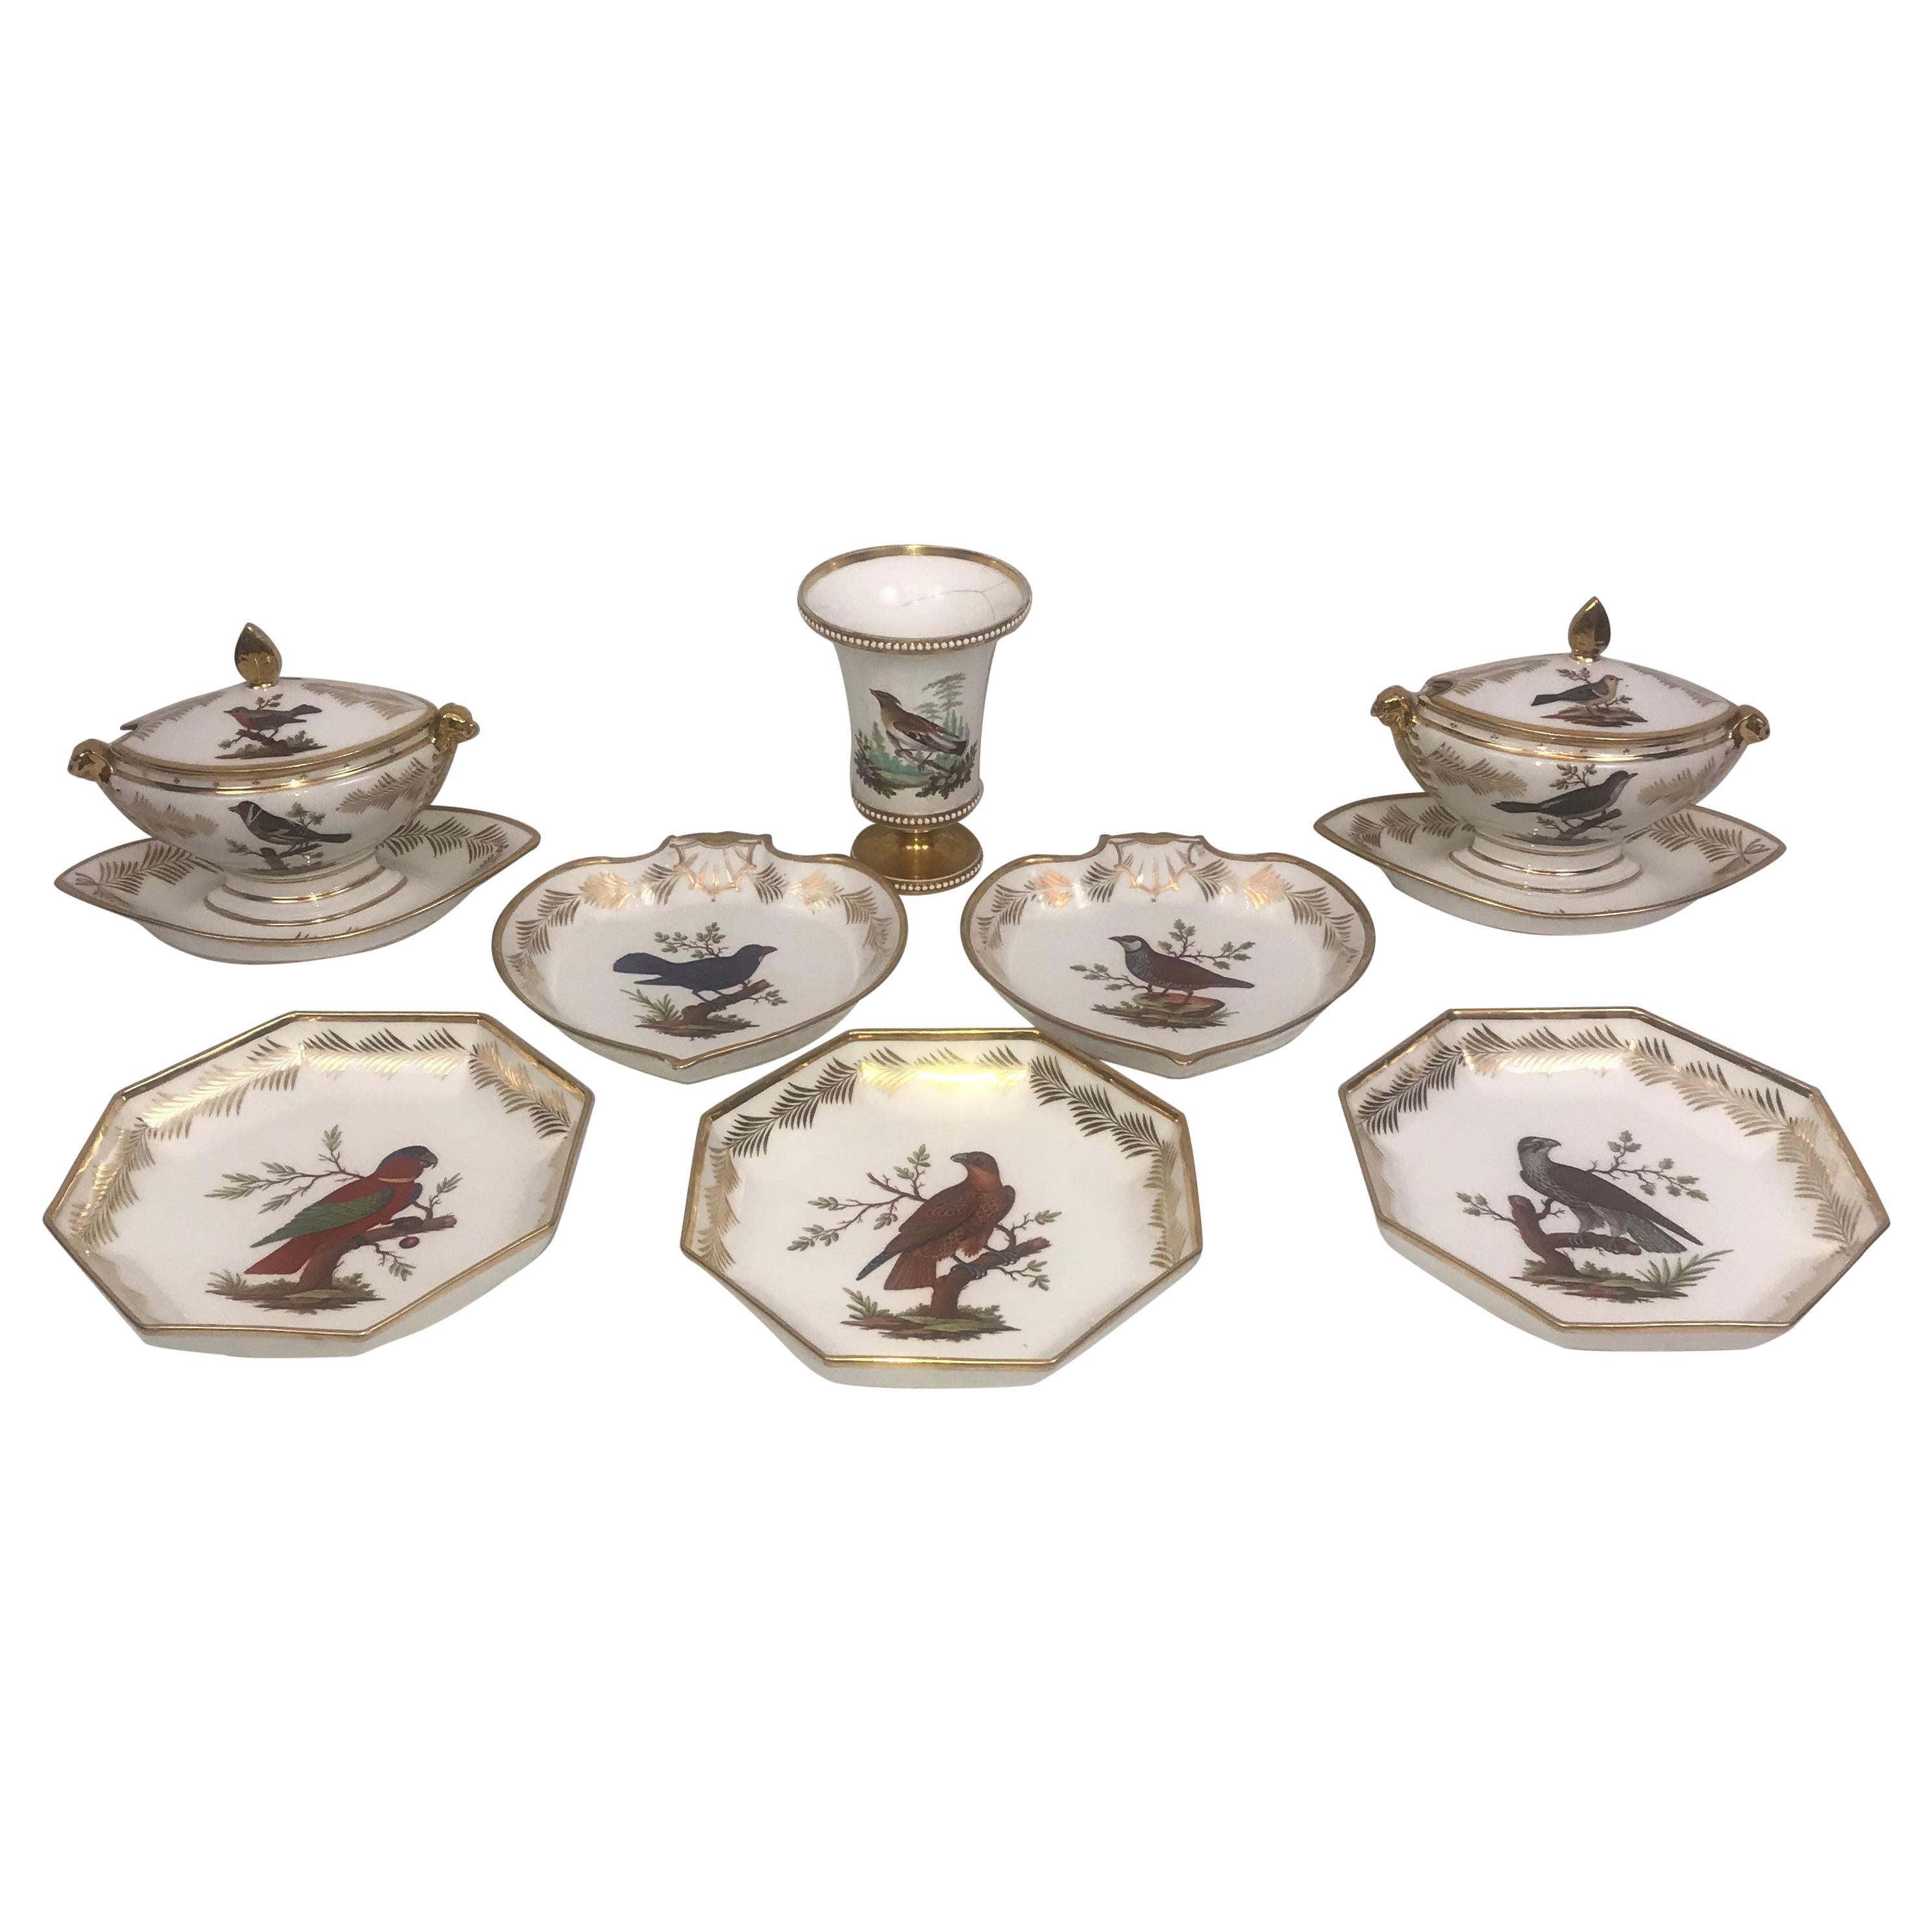 Rare and Important Group of Old Paris Porcelain by Nast Porcelain For Sale